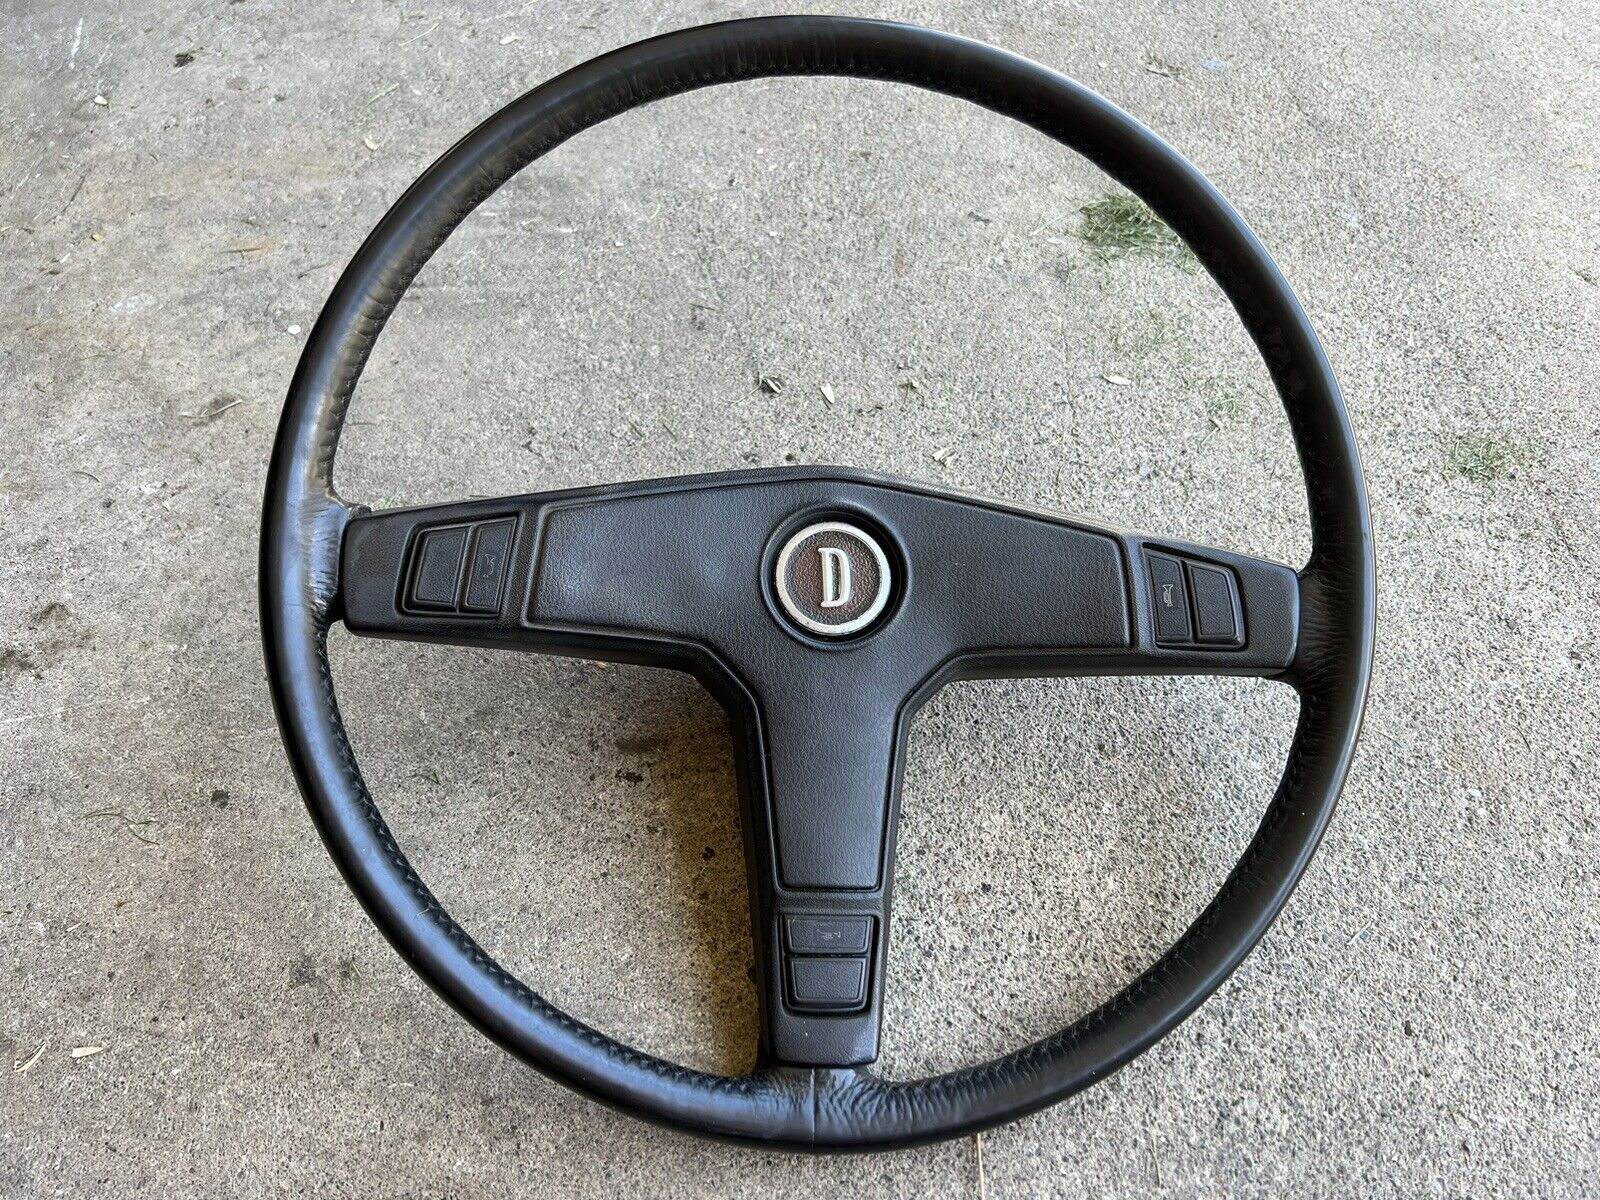 Datsun 510 OEM Steering Wheel / Horn Button Very Nice Condition